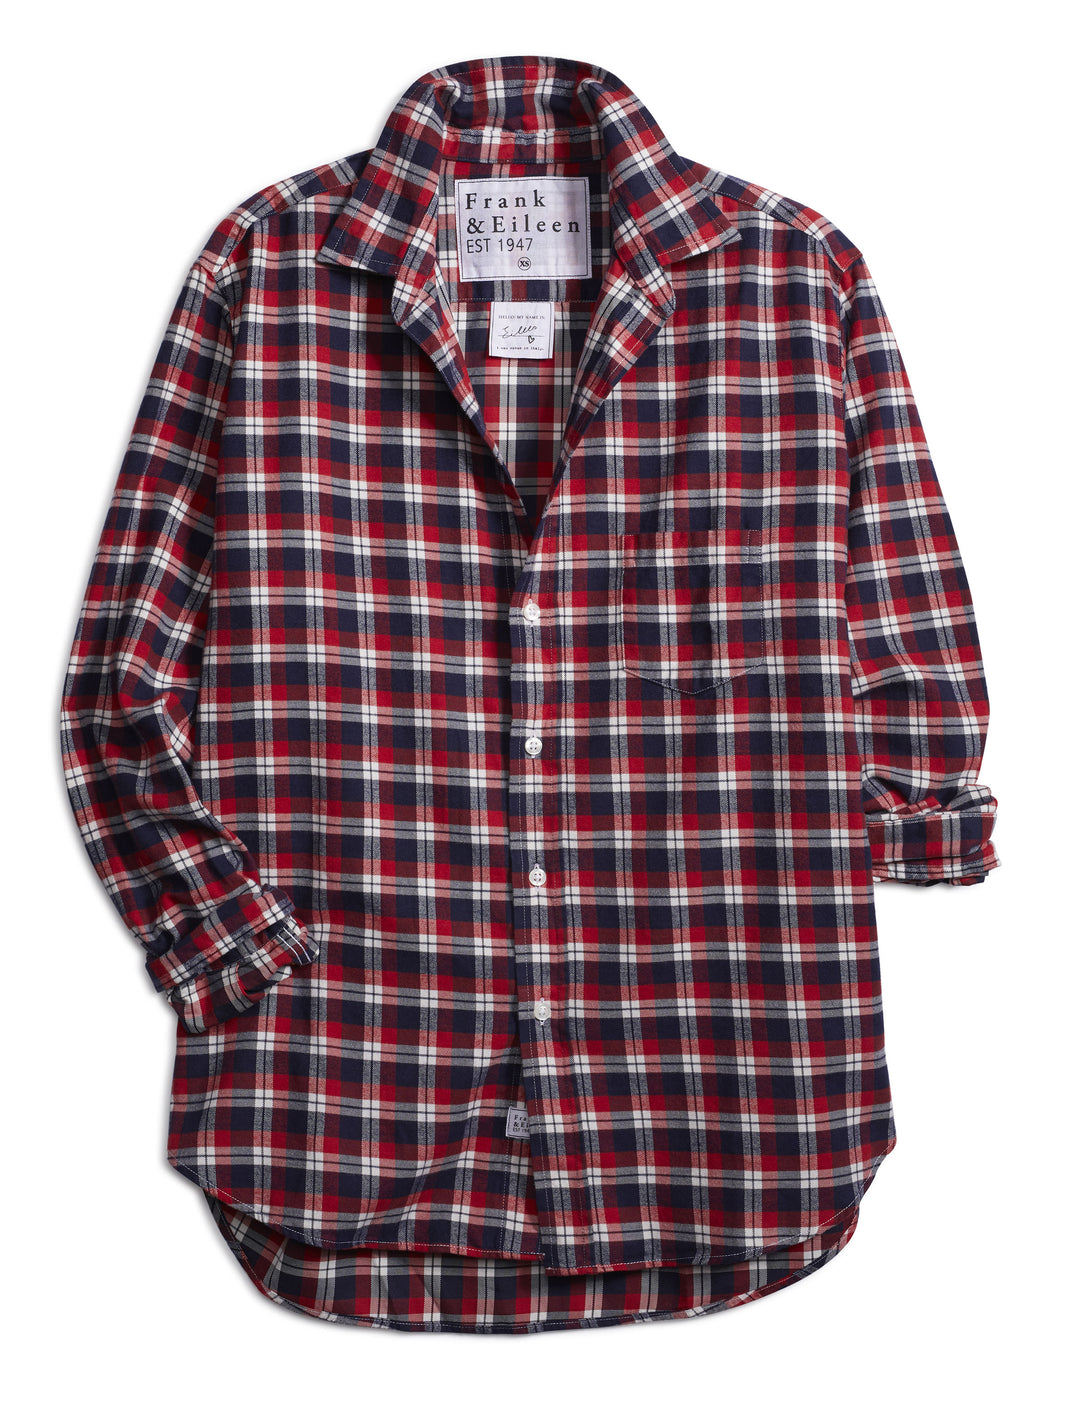 Frank & Eileen - Eileen Woven Button Up in Red, Blue, White Plaid